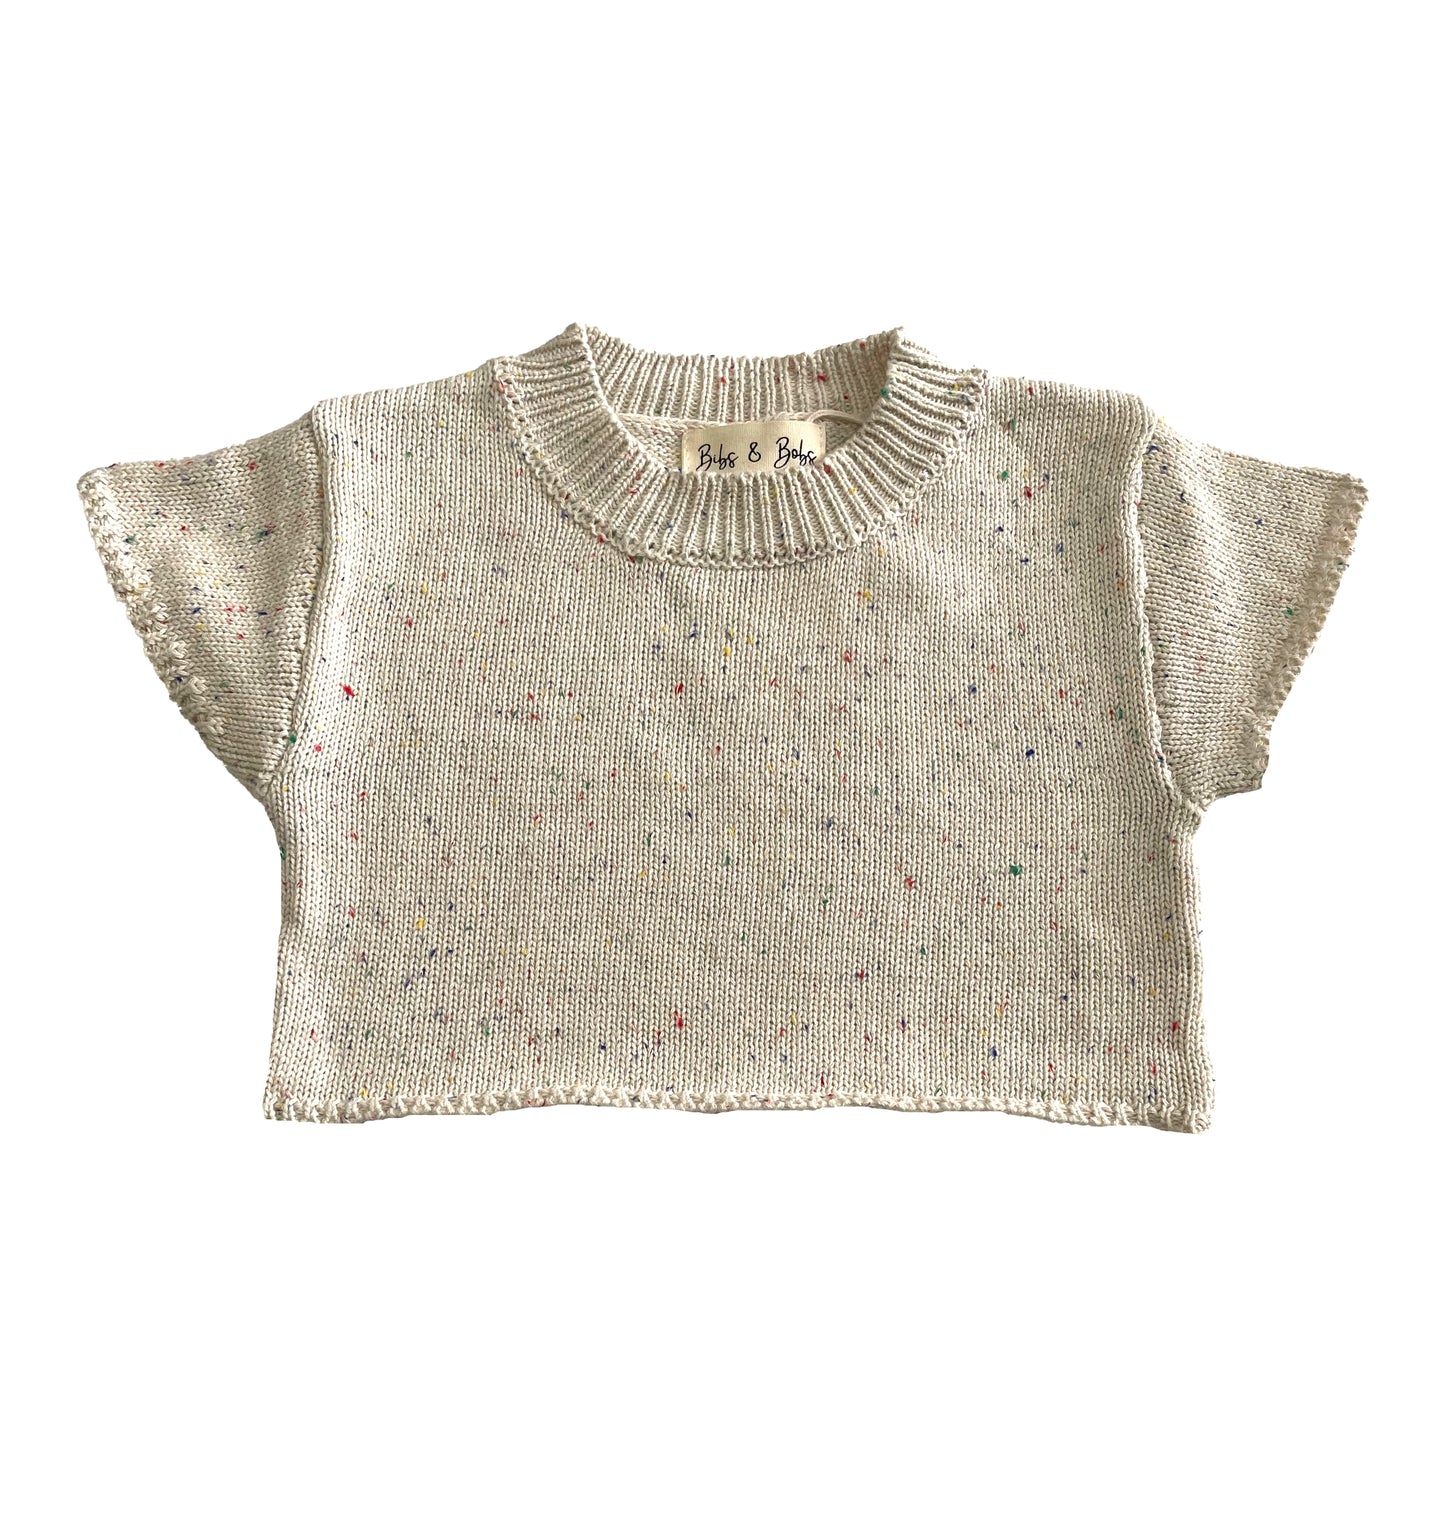 Charlie knitted top – Bibs and Bobs